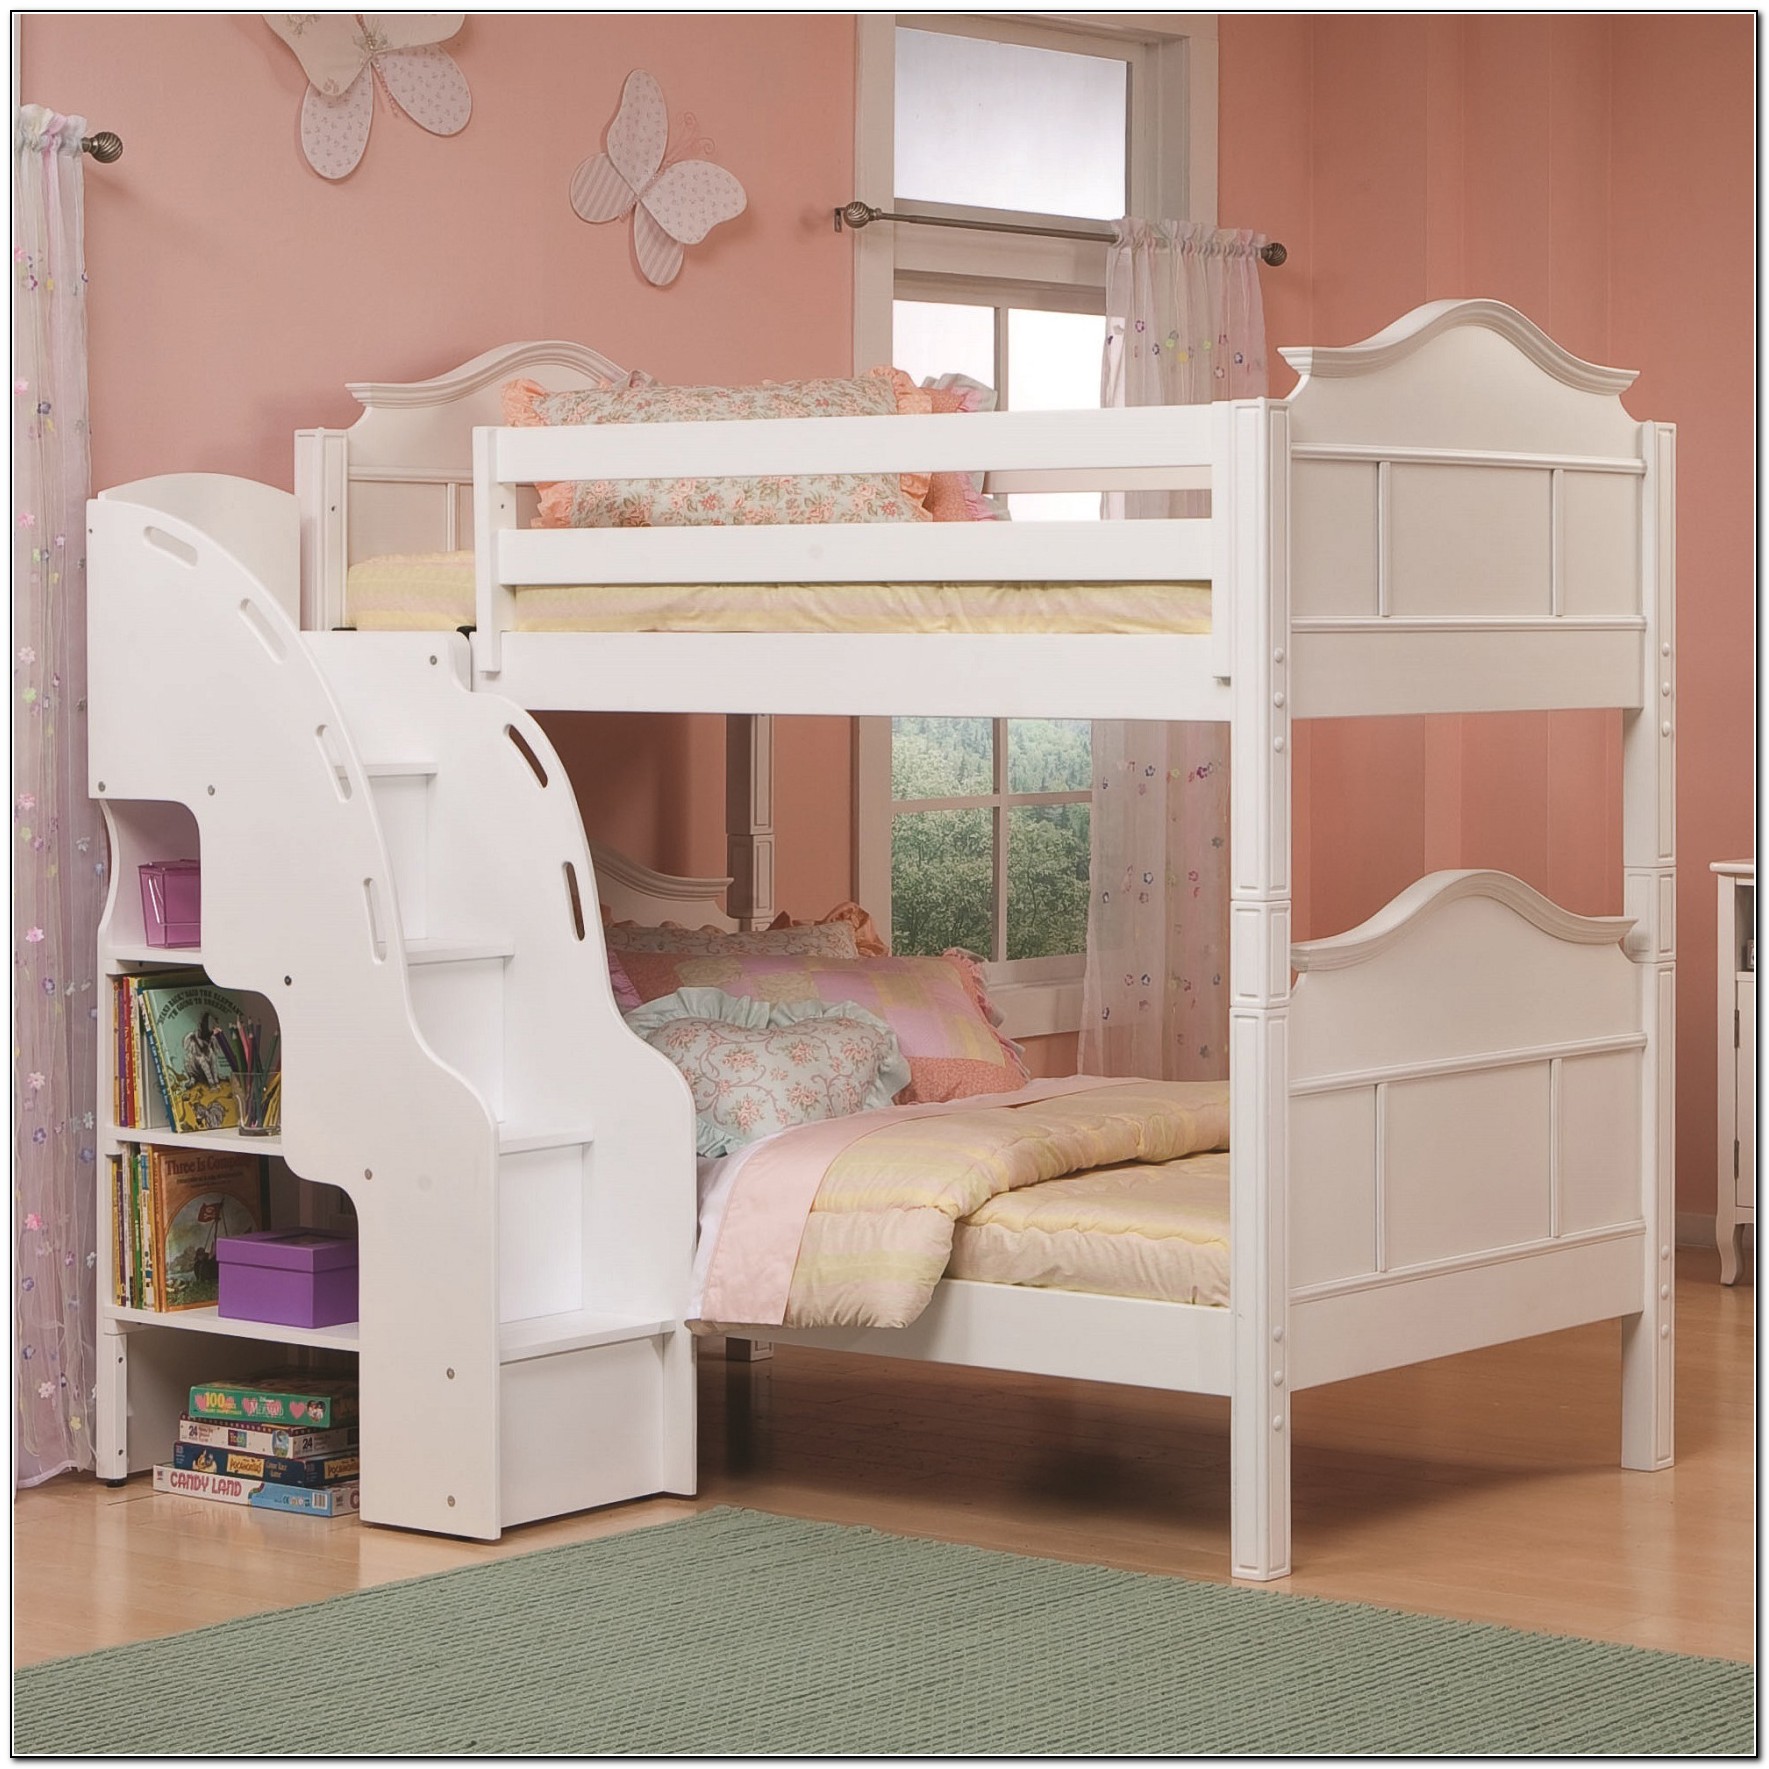 Bunk Beds With Storage For Girls